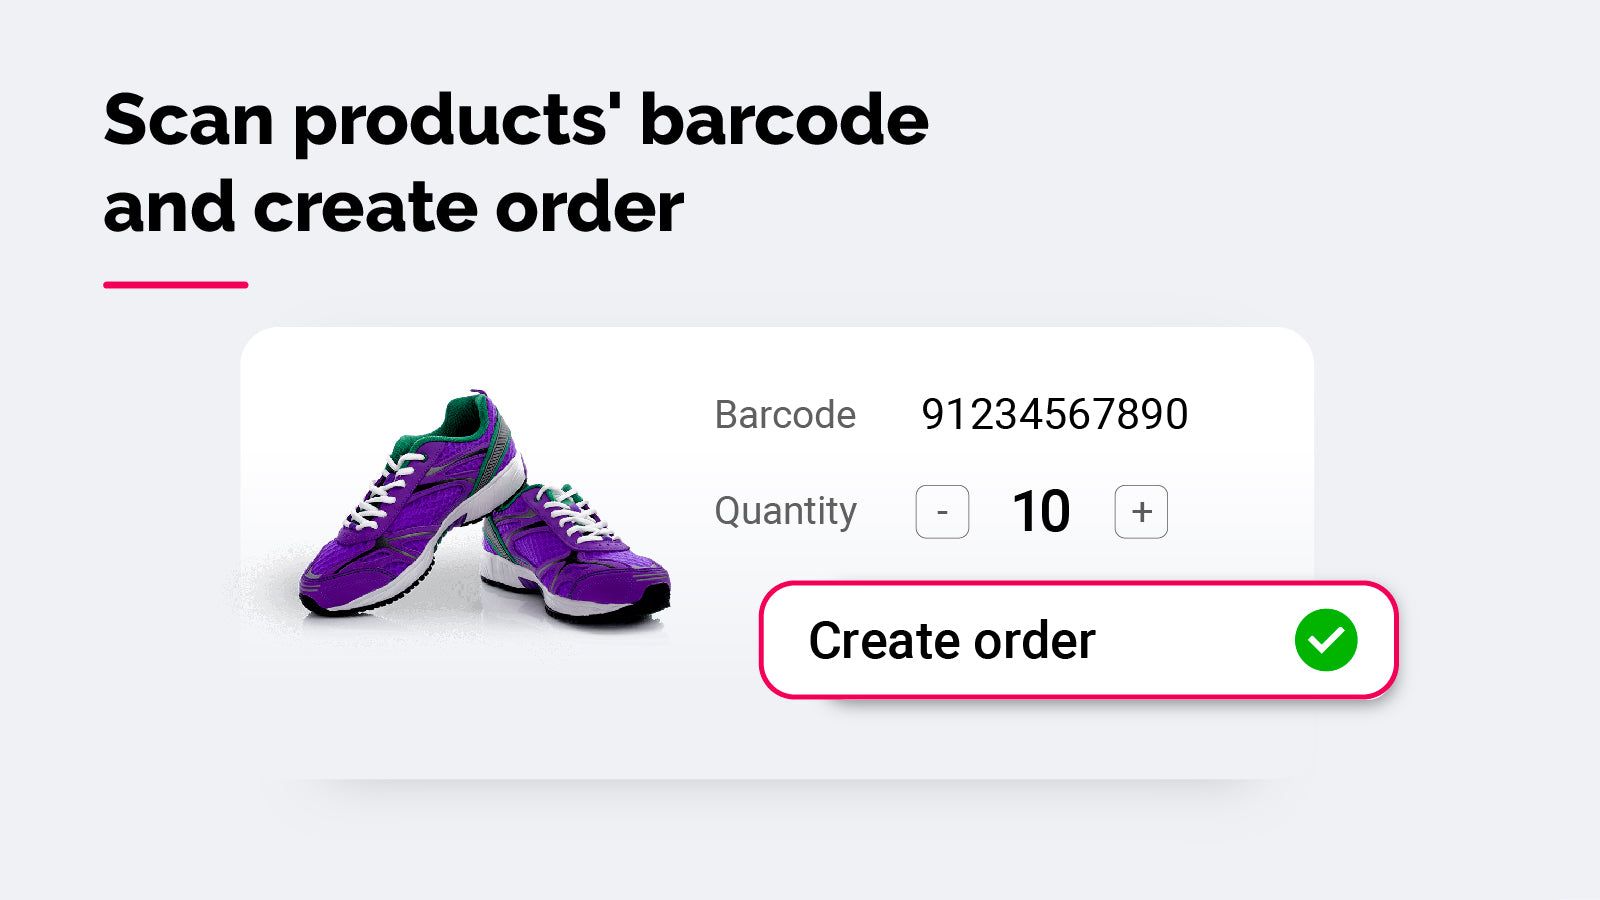 Scan products' barcode and create order